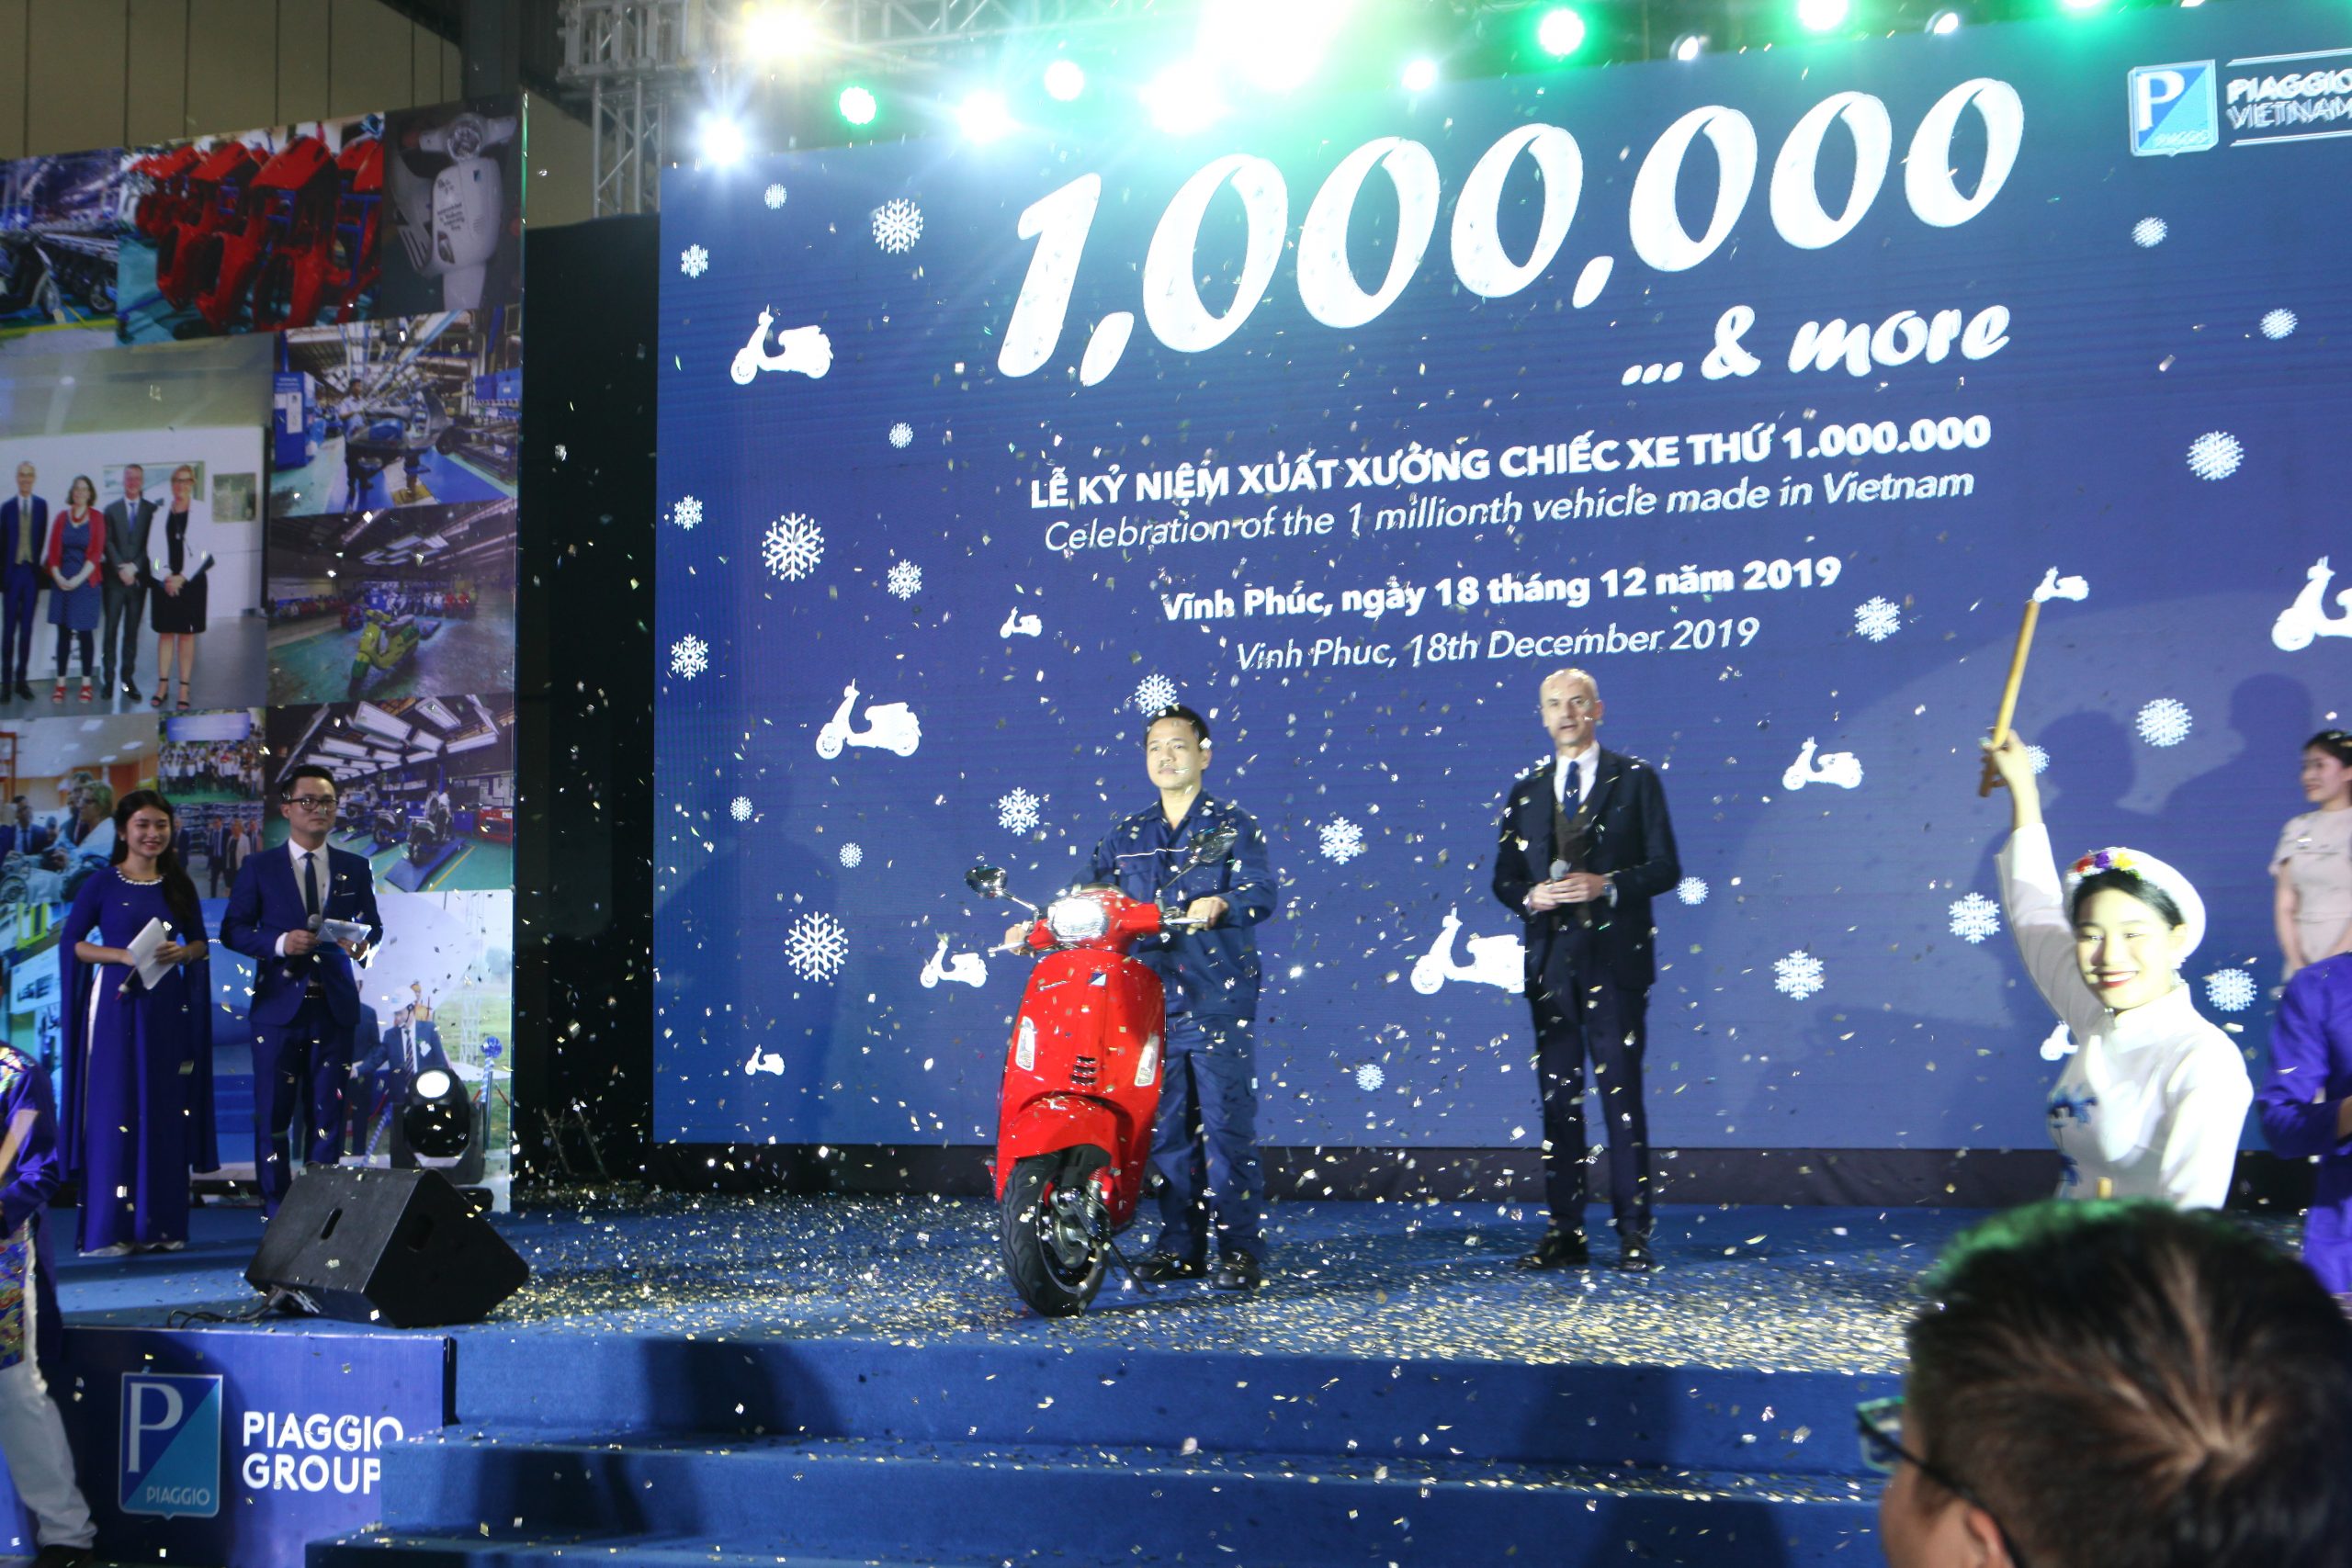 AIT is proud to create impressive moments for Piaggio's 1 millionth motorcycle production celebration